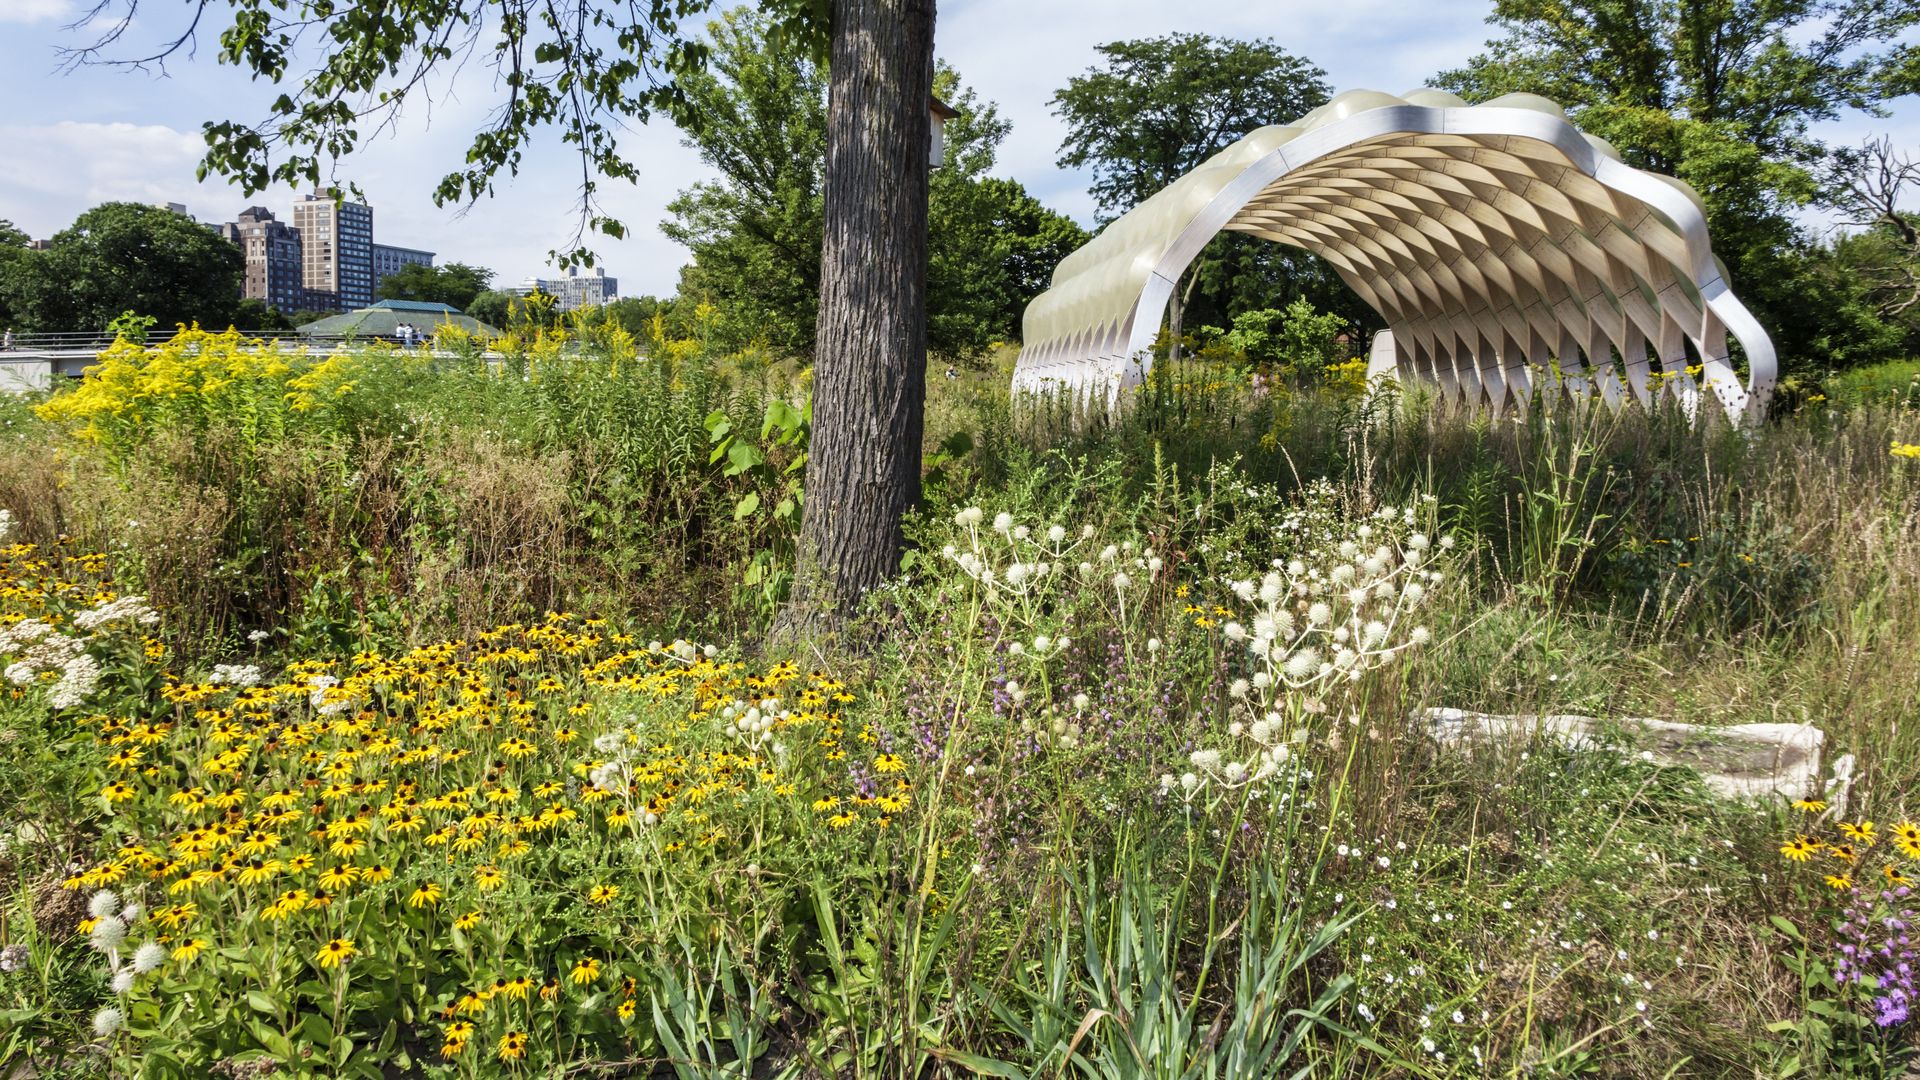 Wildflowers surround the covered, geometrical People's Gas Education Pavilion in Chicago's Lincoln Park.